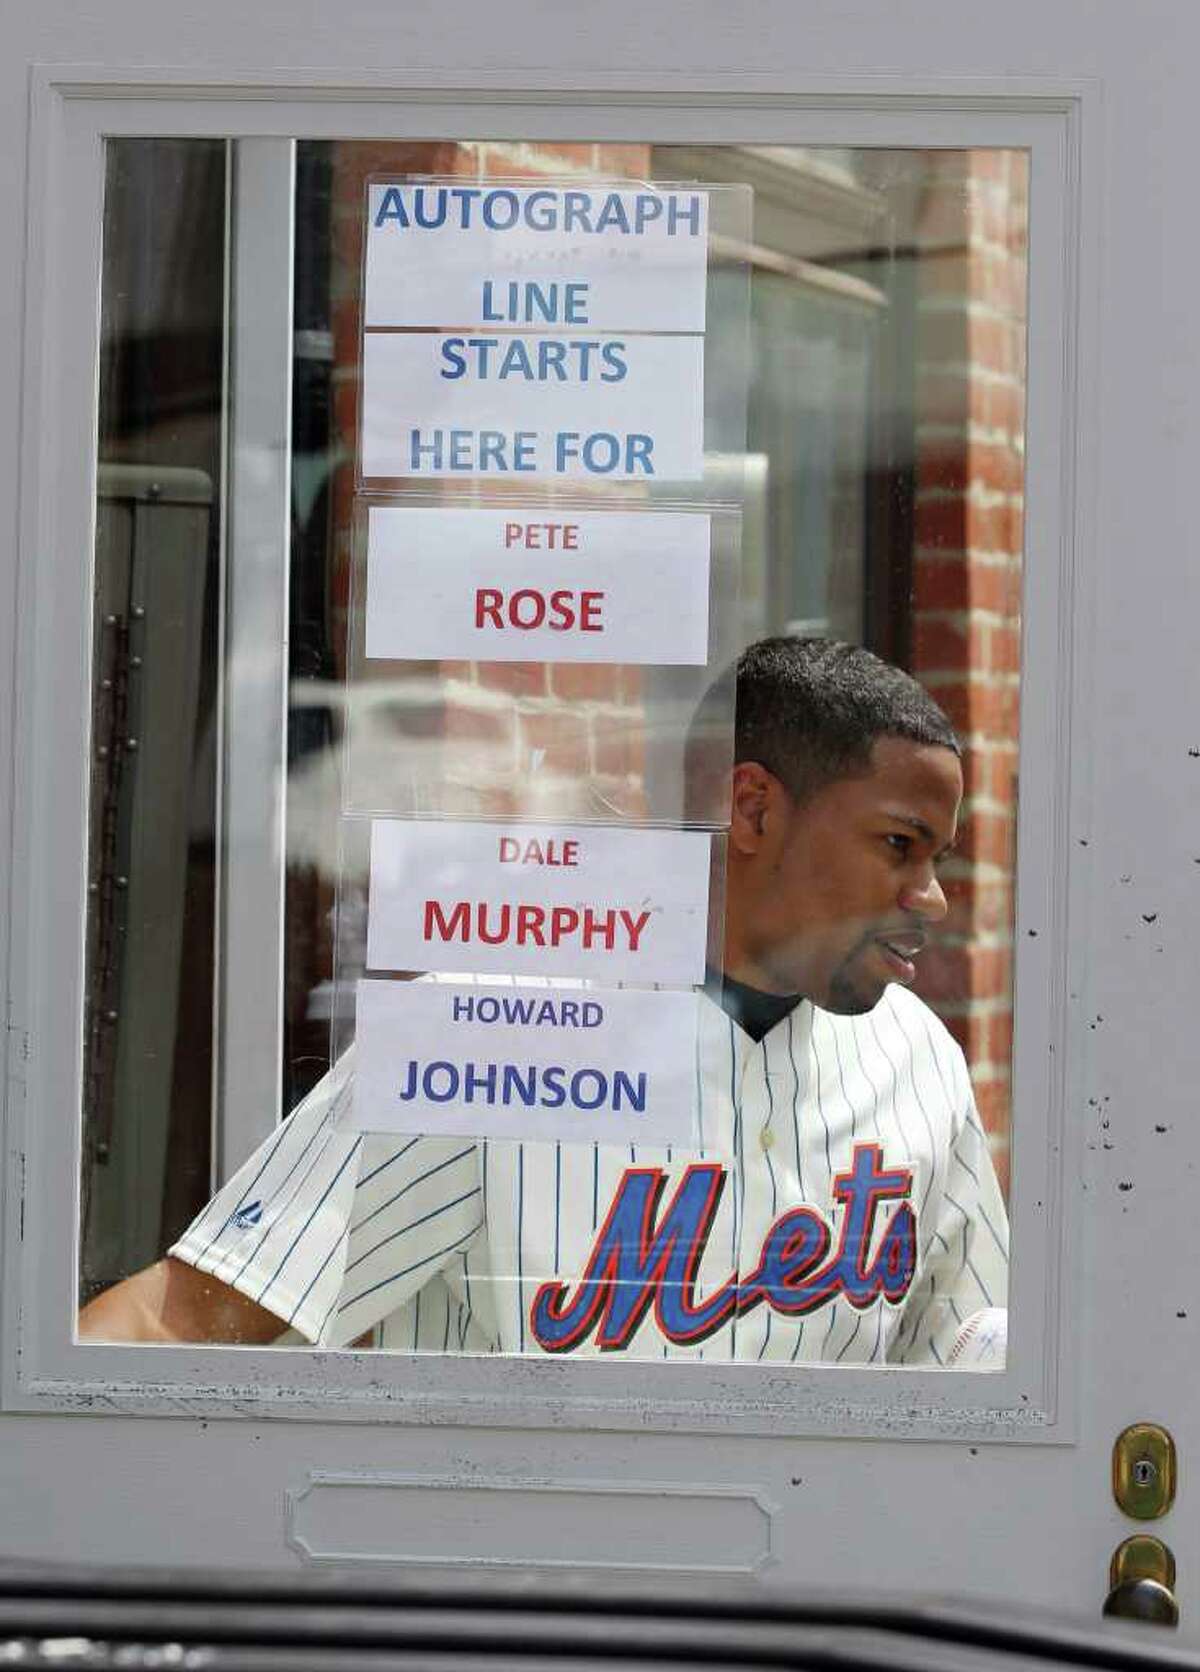 Lamont Aulet of Brooklyn, N.Y., leaves a shop after getting an autograph in Cooperstown, N.Y., on Saturday, July 23, 2011. The National Baseball Hall of Fame holds its induction ceremony on Sunday. (AP Photo/Mike Groll)